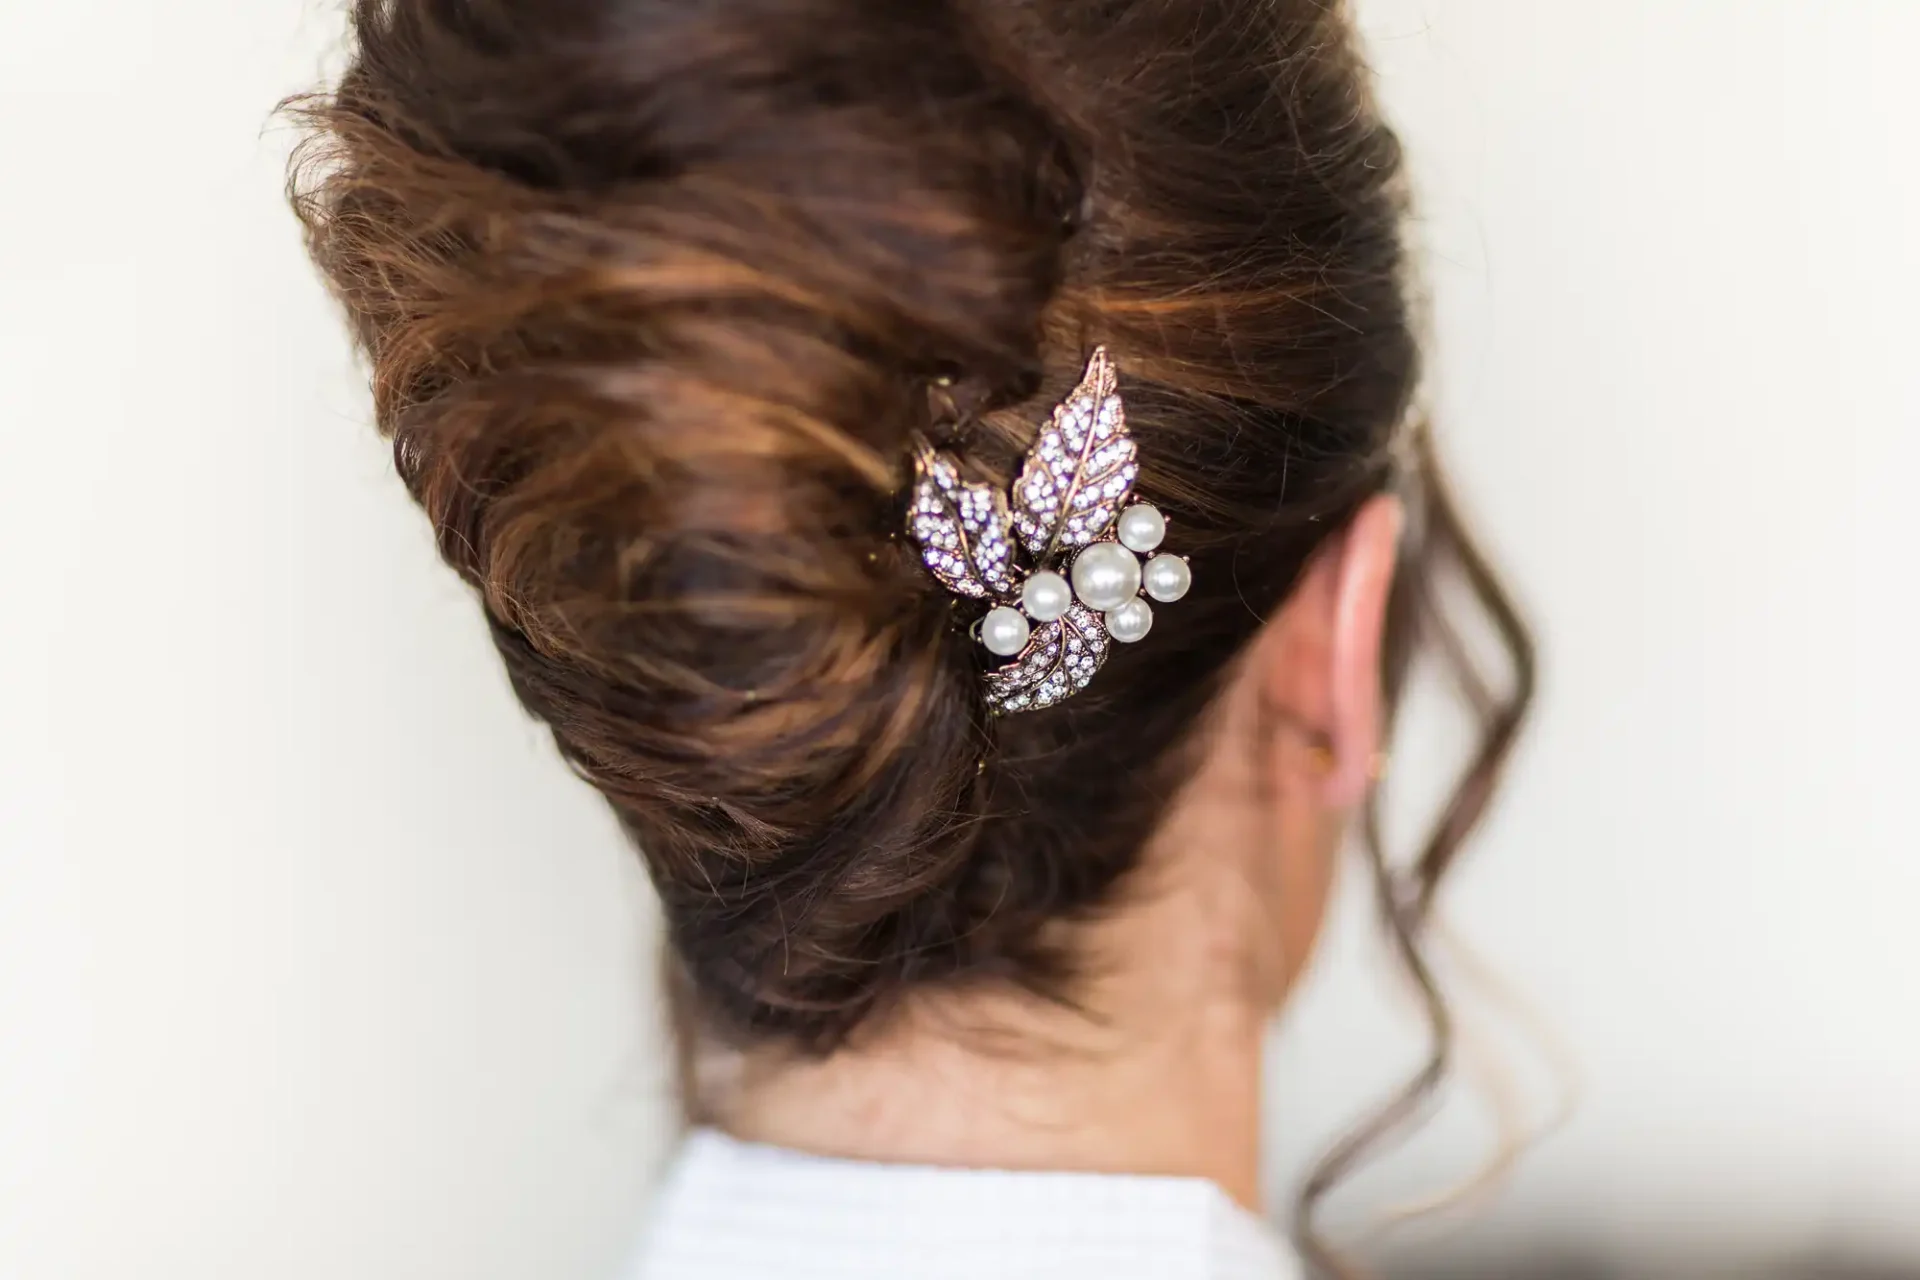 An elegant updo hairstyle adorned with a decorative hairpin featuring pearls and glittering crystals.